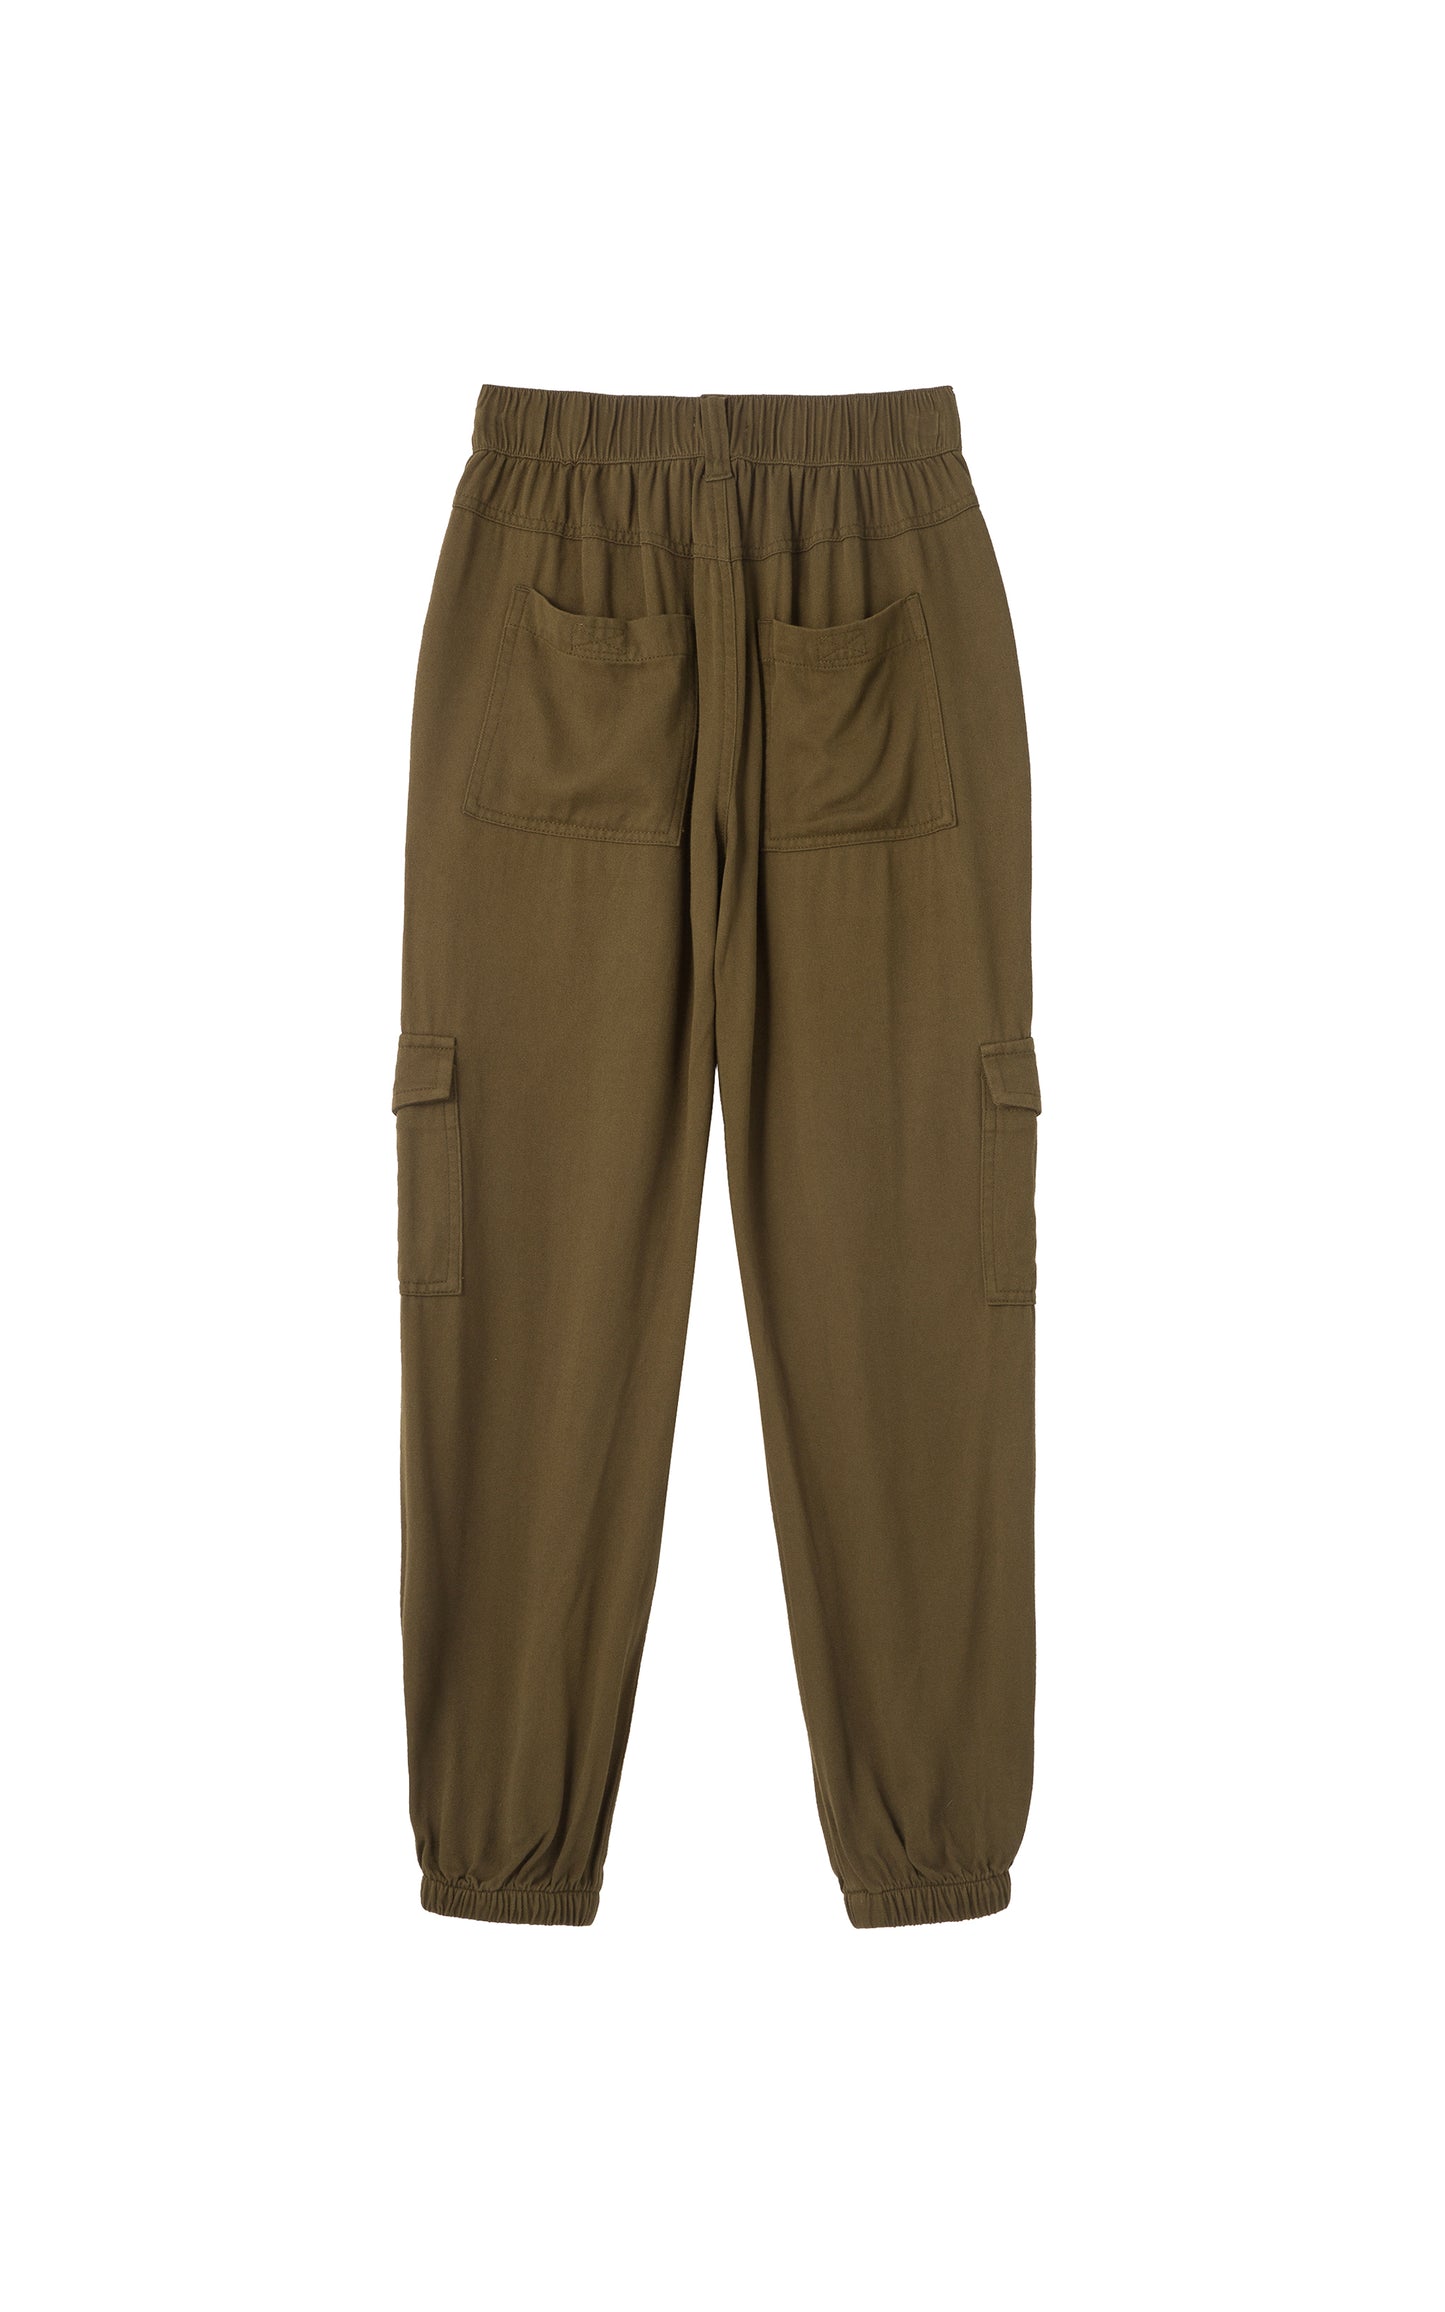 Back view of olive pants with cargo pockets, pleat accents, and elastic ankle cuffs. 